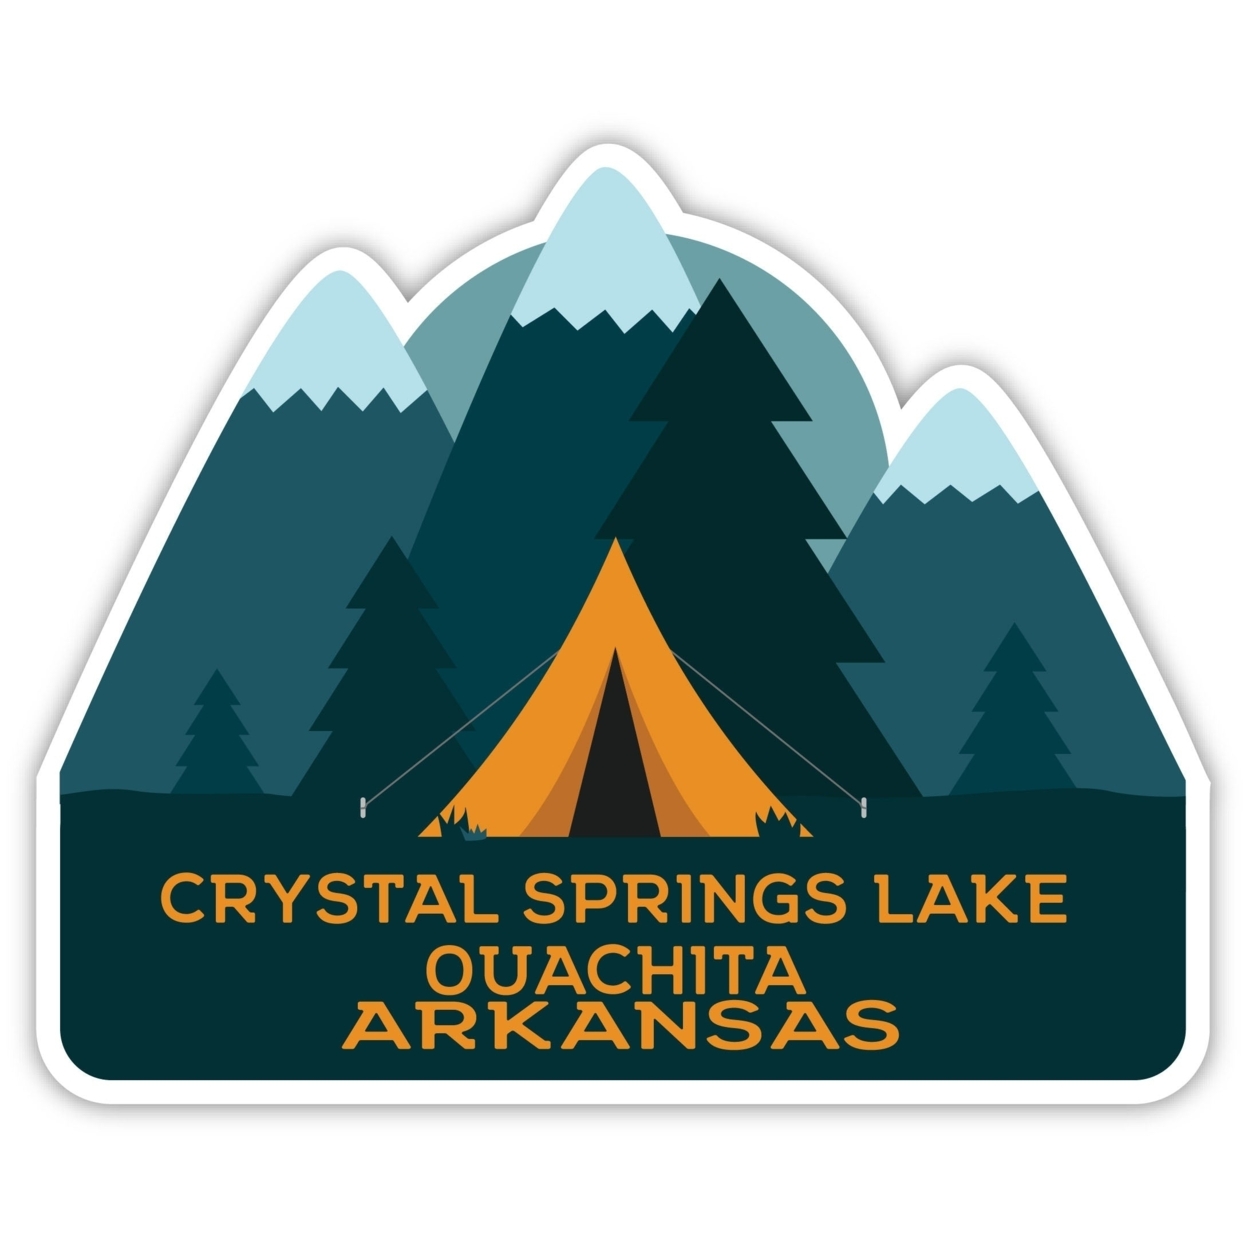 Crystal Springs Lake Ouachita Arkansas Souvenir Decorative Stickers (Choose Theme And Size) - 4-Pack, 8-Inch, Tent